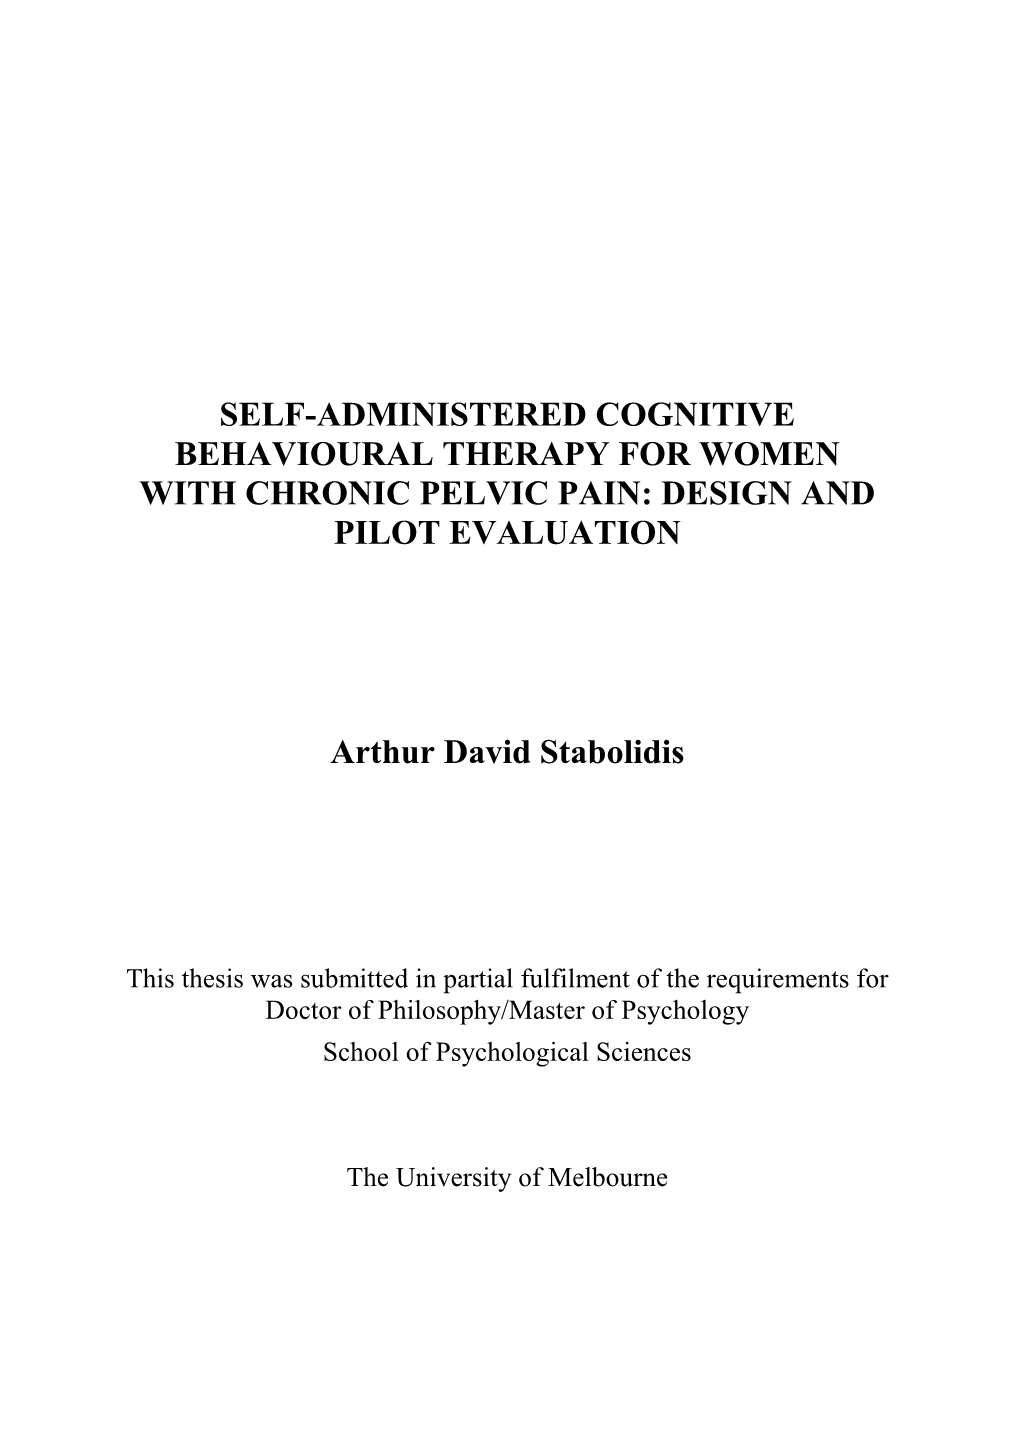 Self-Administered Cognitive Behavioural Therapy for Women with Chronic Pelvic Pain: Design and Pilot Evaluation